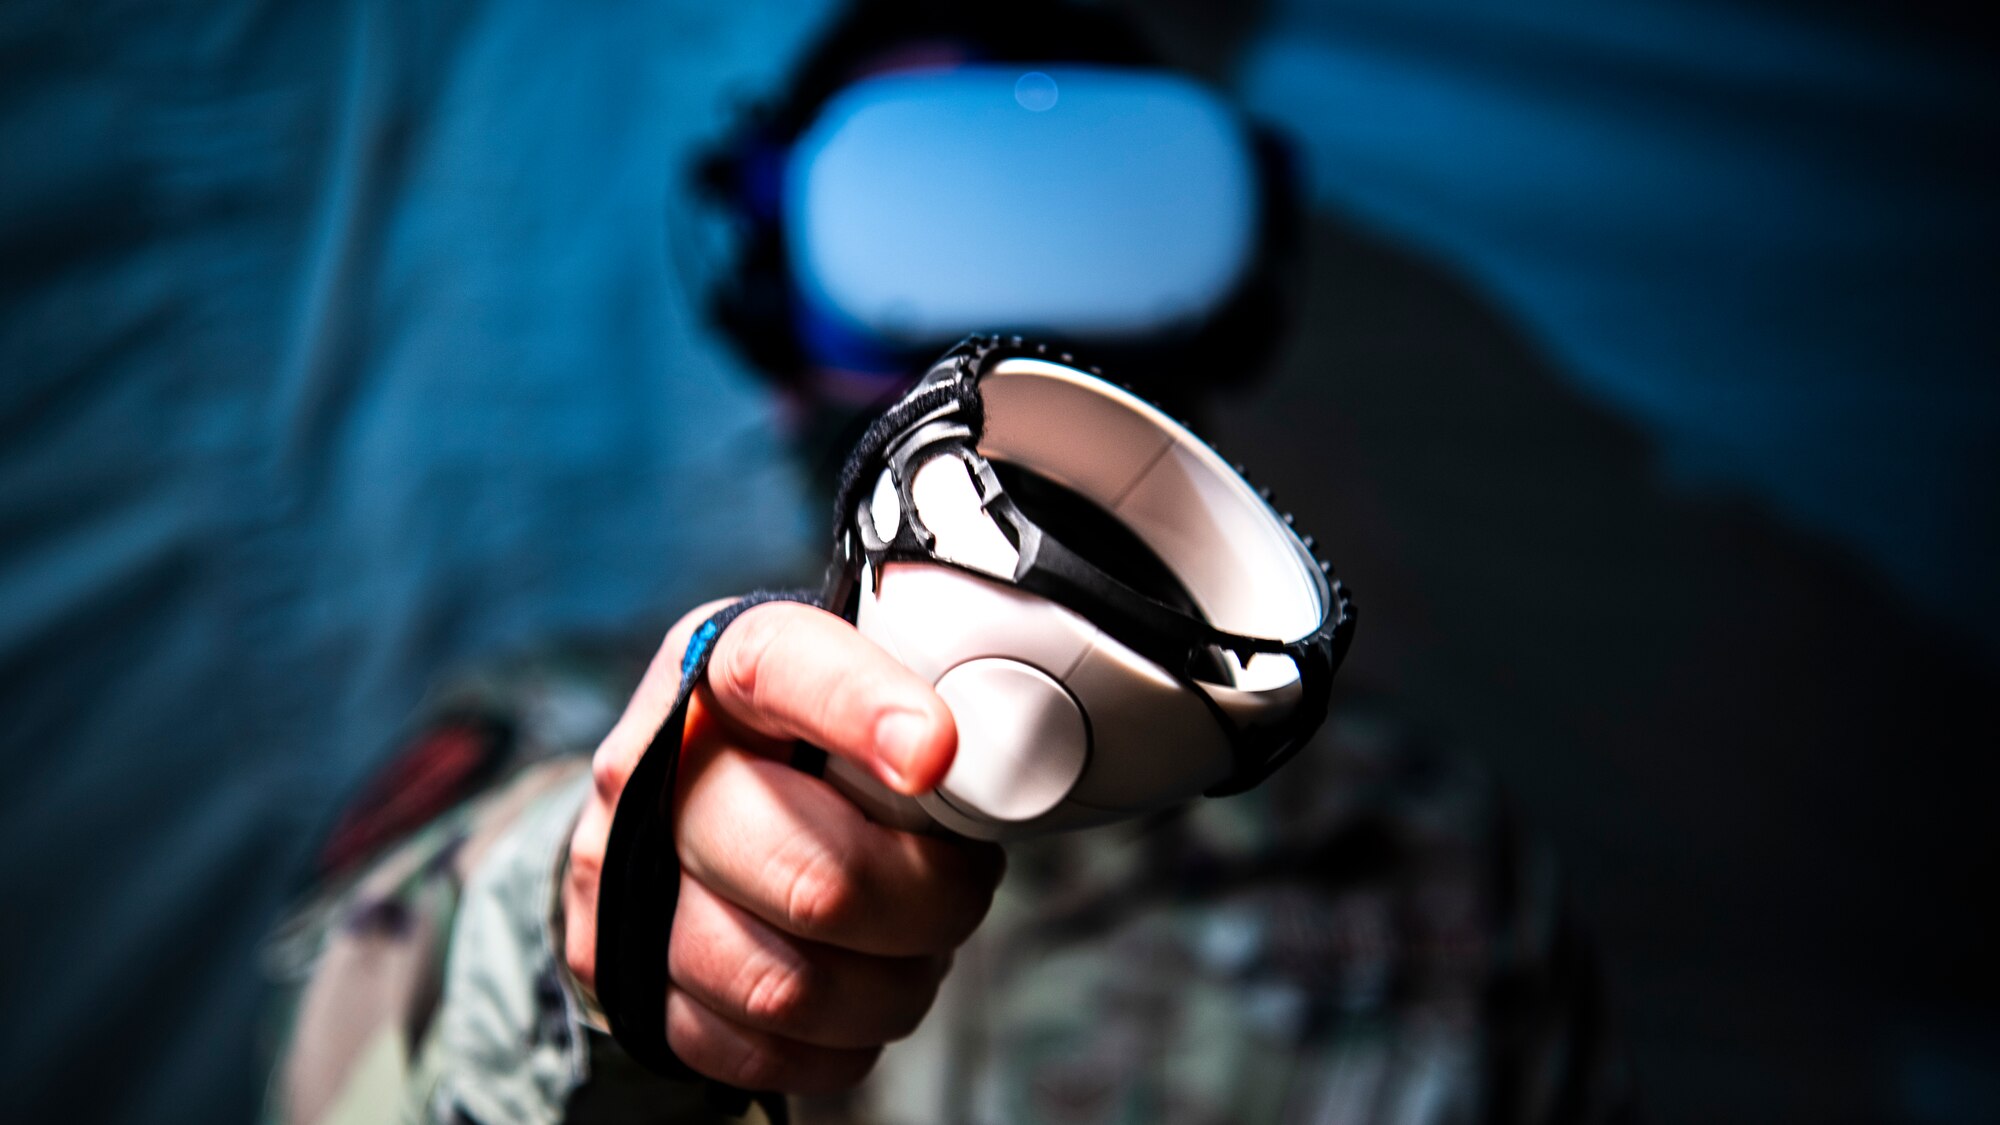 A U.S. Air Force Airman from the 366th Fighter Wing uses virtual reality during Agile Flag 21-1 at Tyndall Air Force Base, Florida, Oct. 23, 2020. Virtual reality is an innovative service provided by the 366th FW chaplaincy that can be used in deployed environments to let Airmen experience environments that hold sentimental value and boost morale. For instance, an Airman can go virtually fishing at their family’s favorite fishing hole. (U.S. Air Force photo by Senior Airman Andrew Kobialka)